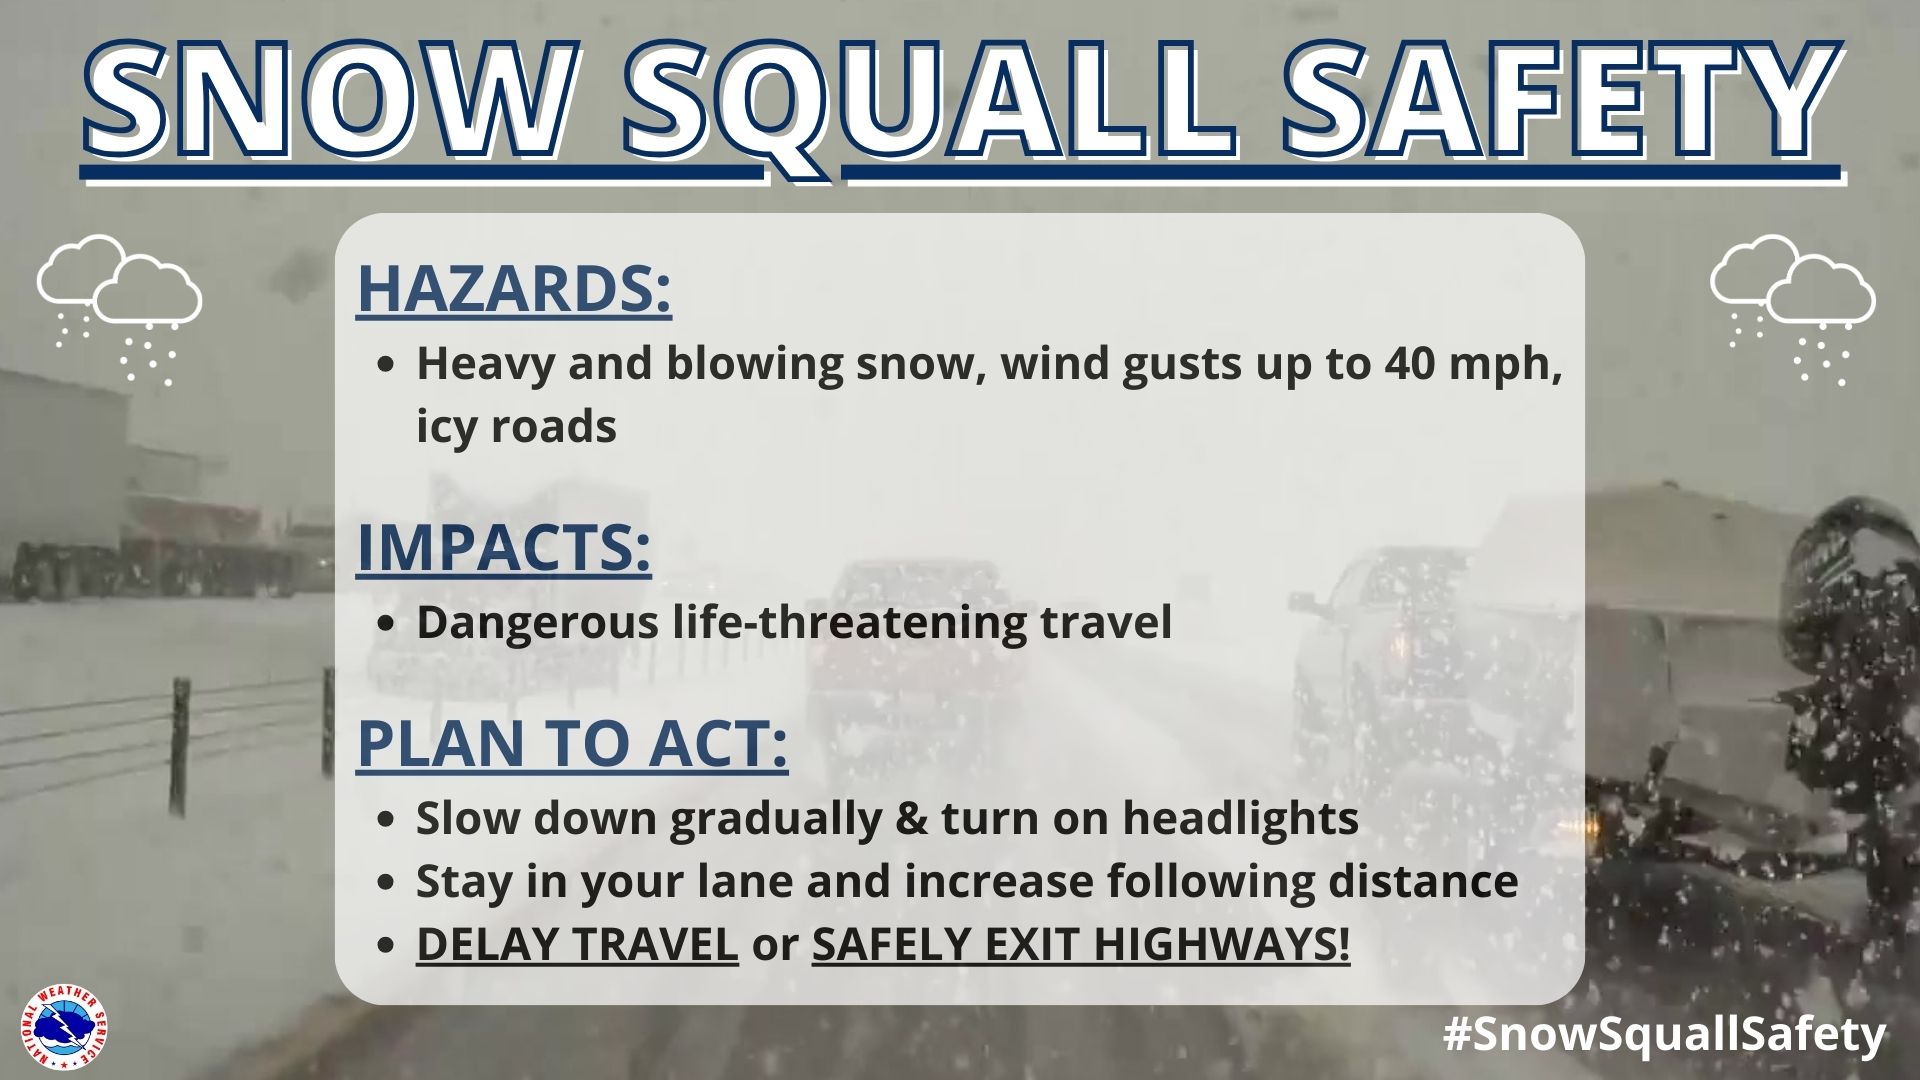 Snow Squall Safety: Hazards: heavy and blowing snow, wind gusts up to 40 miles per hour and icy roads Impacts: Dangerous life-threatening travel Slow down gradually and turn on headlights, stay in your lane and increase following distance, delay travel or safely exit highways!